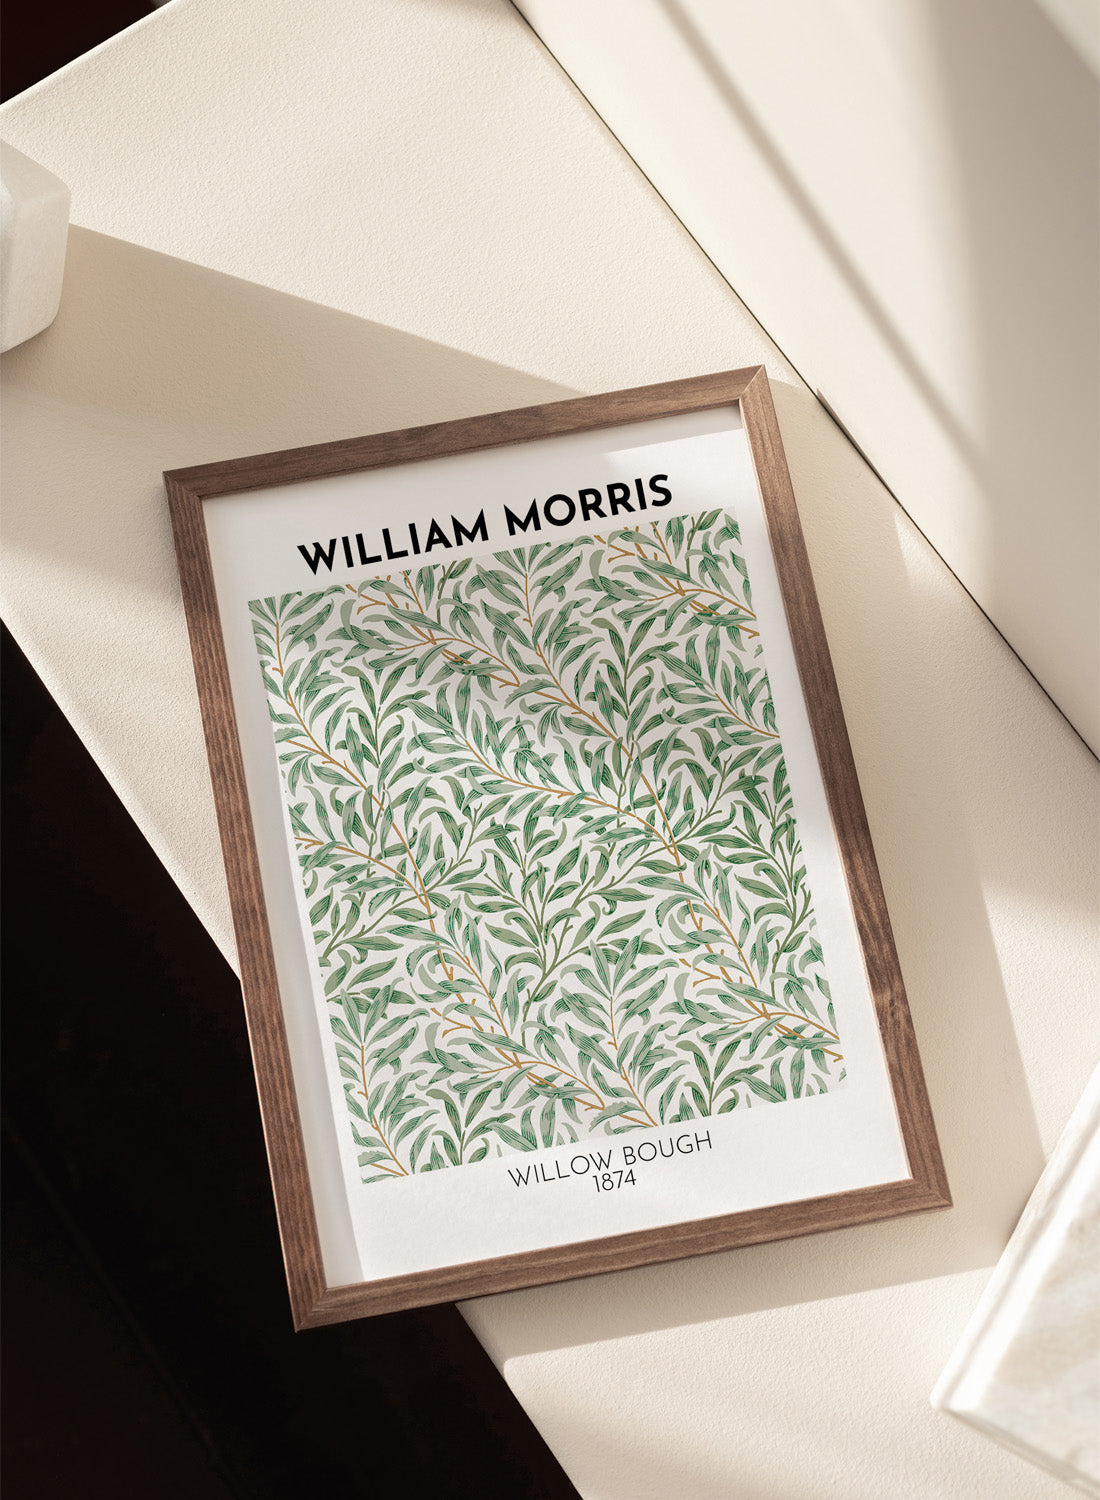 WILLOW BOUGH BY WILLIAM MORRIS